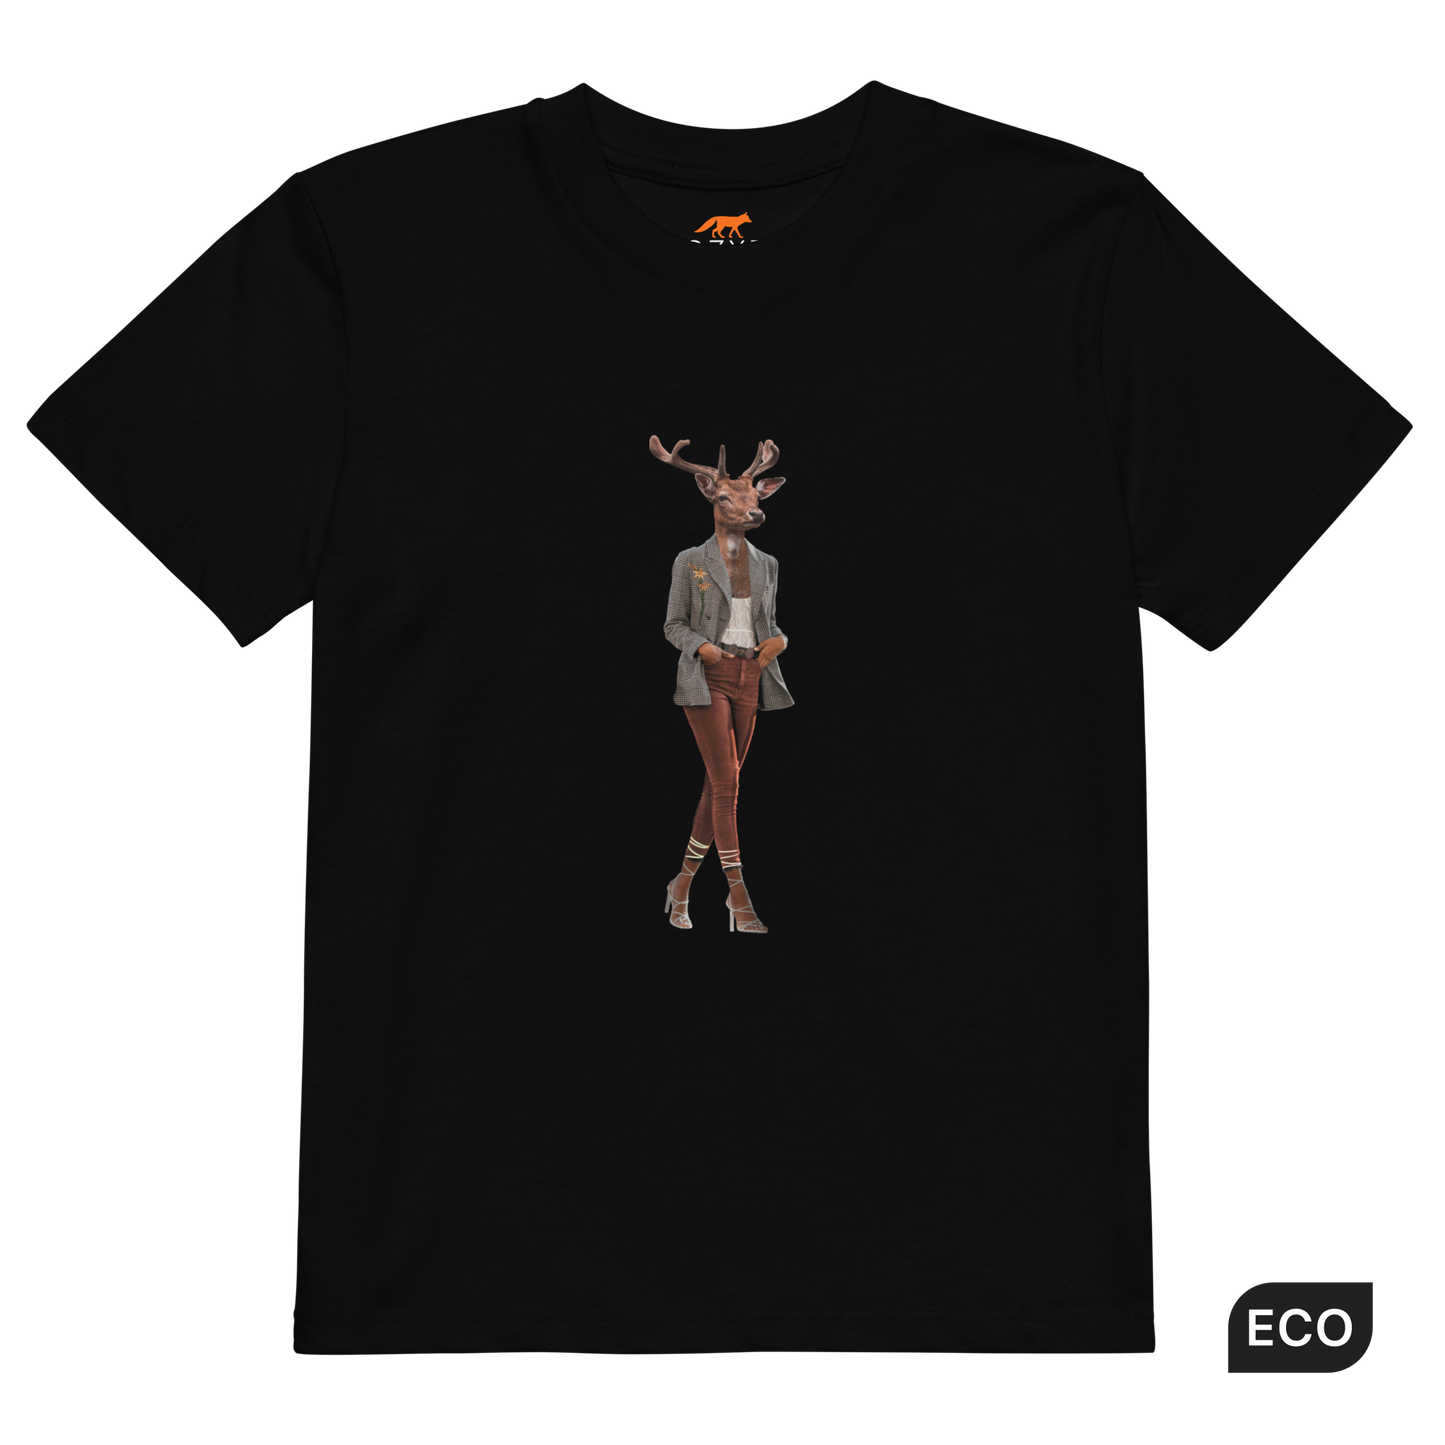 Black Anthropomorphic Deer Organic Cotton Kids T-Shirt featuring an Anthropomorphic Deer graphic on the chest - Kids' Graphic Tees - Funny Animal T-Shirts - Boozy Fox